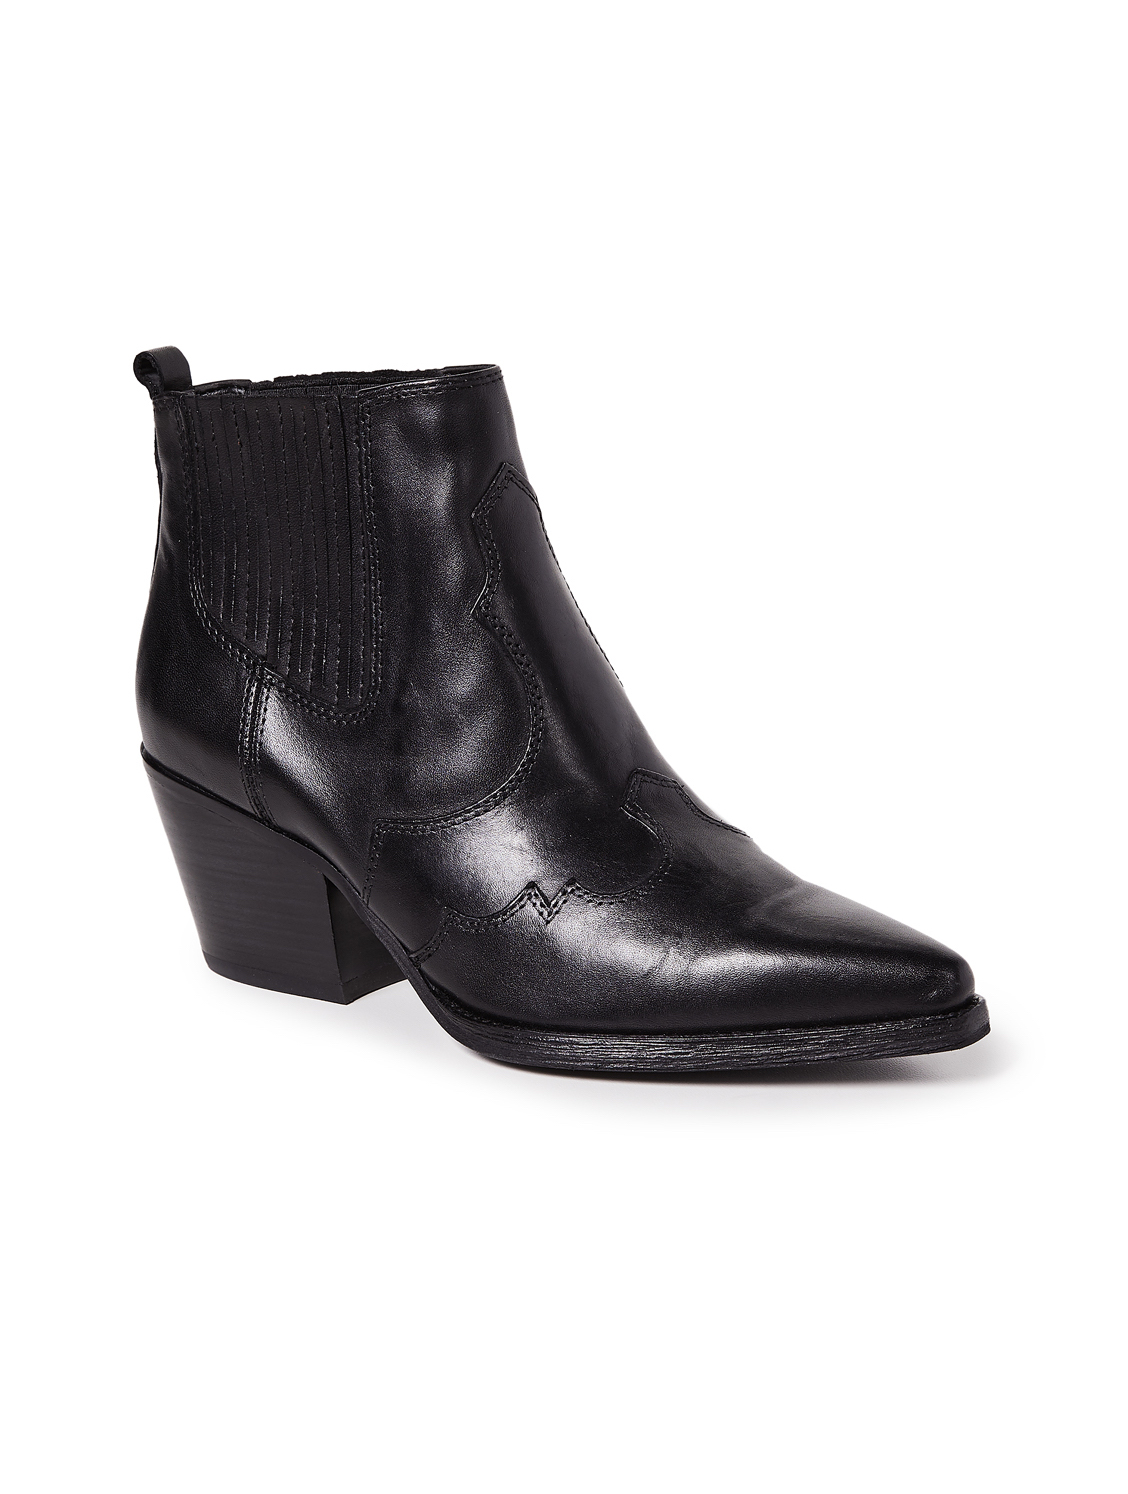 Black Western Ankle Boots 